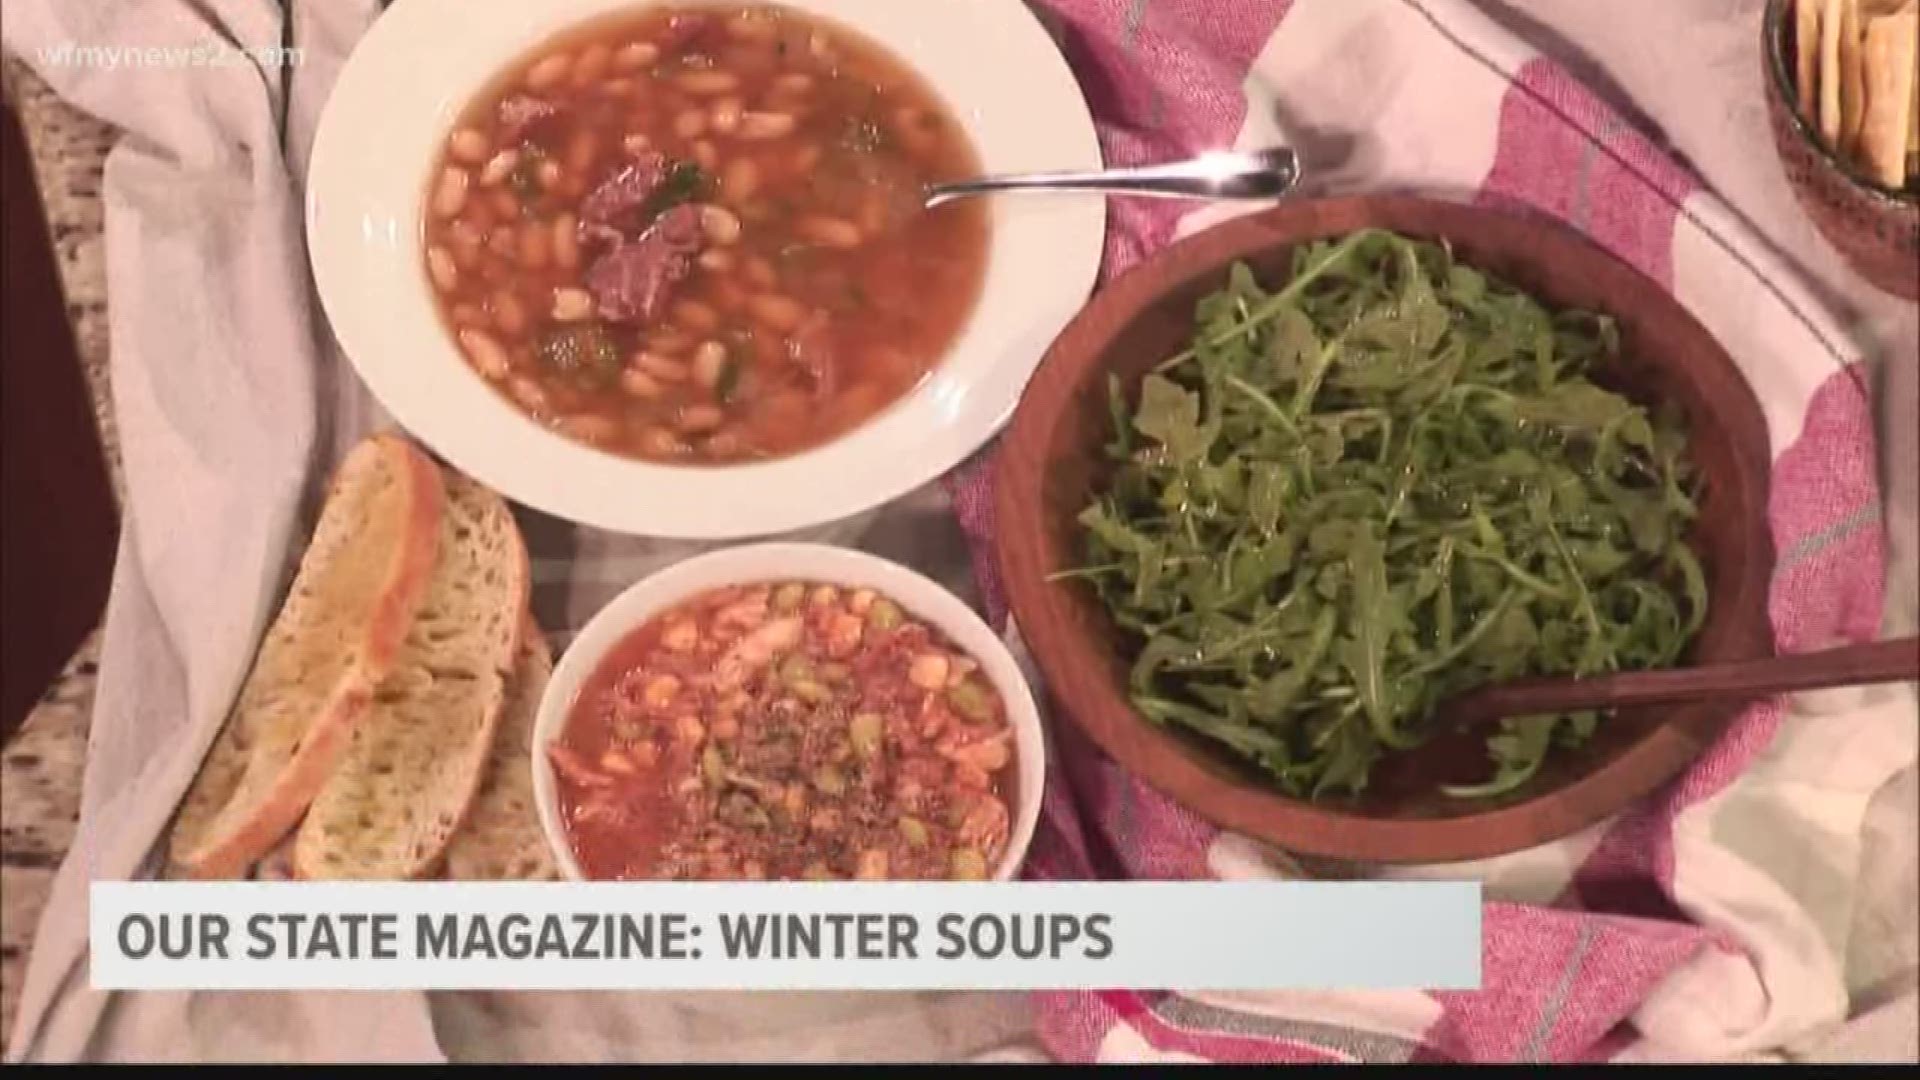 Our State stops by with some tasty winter soup recipes from their January issue to warm you up in 2020.